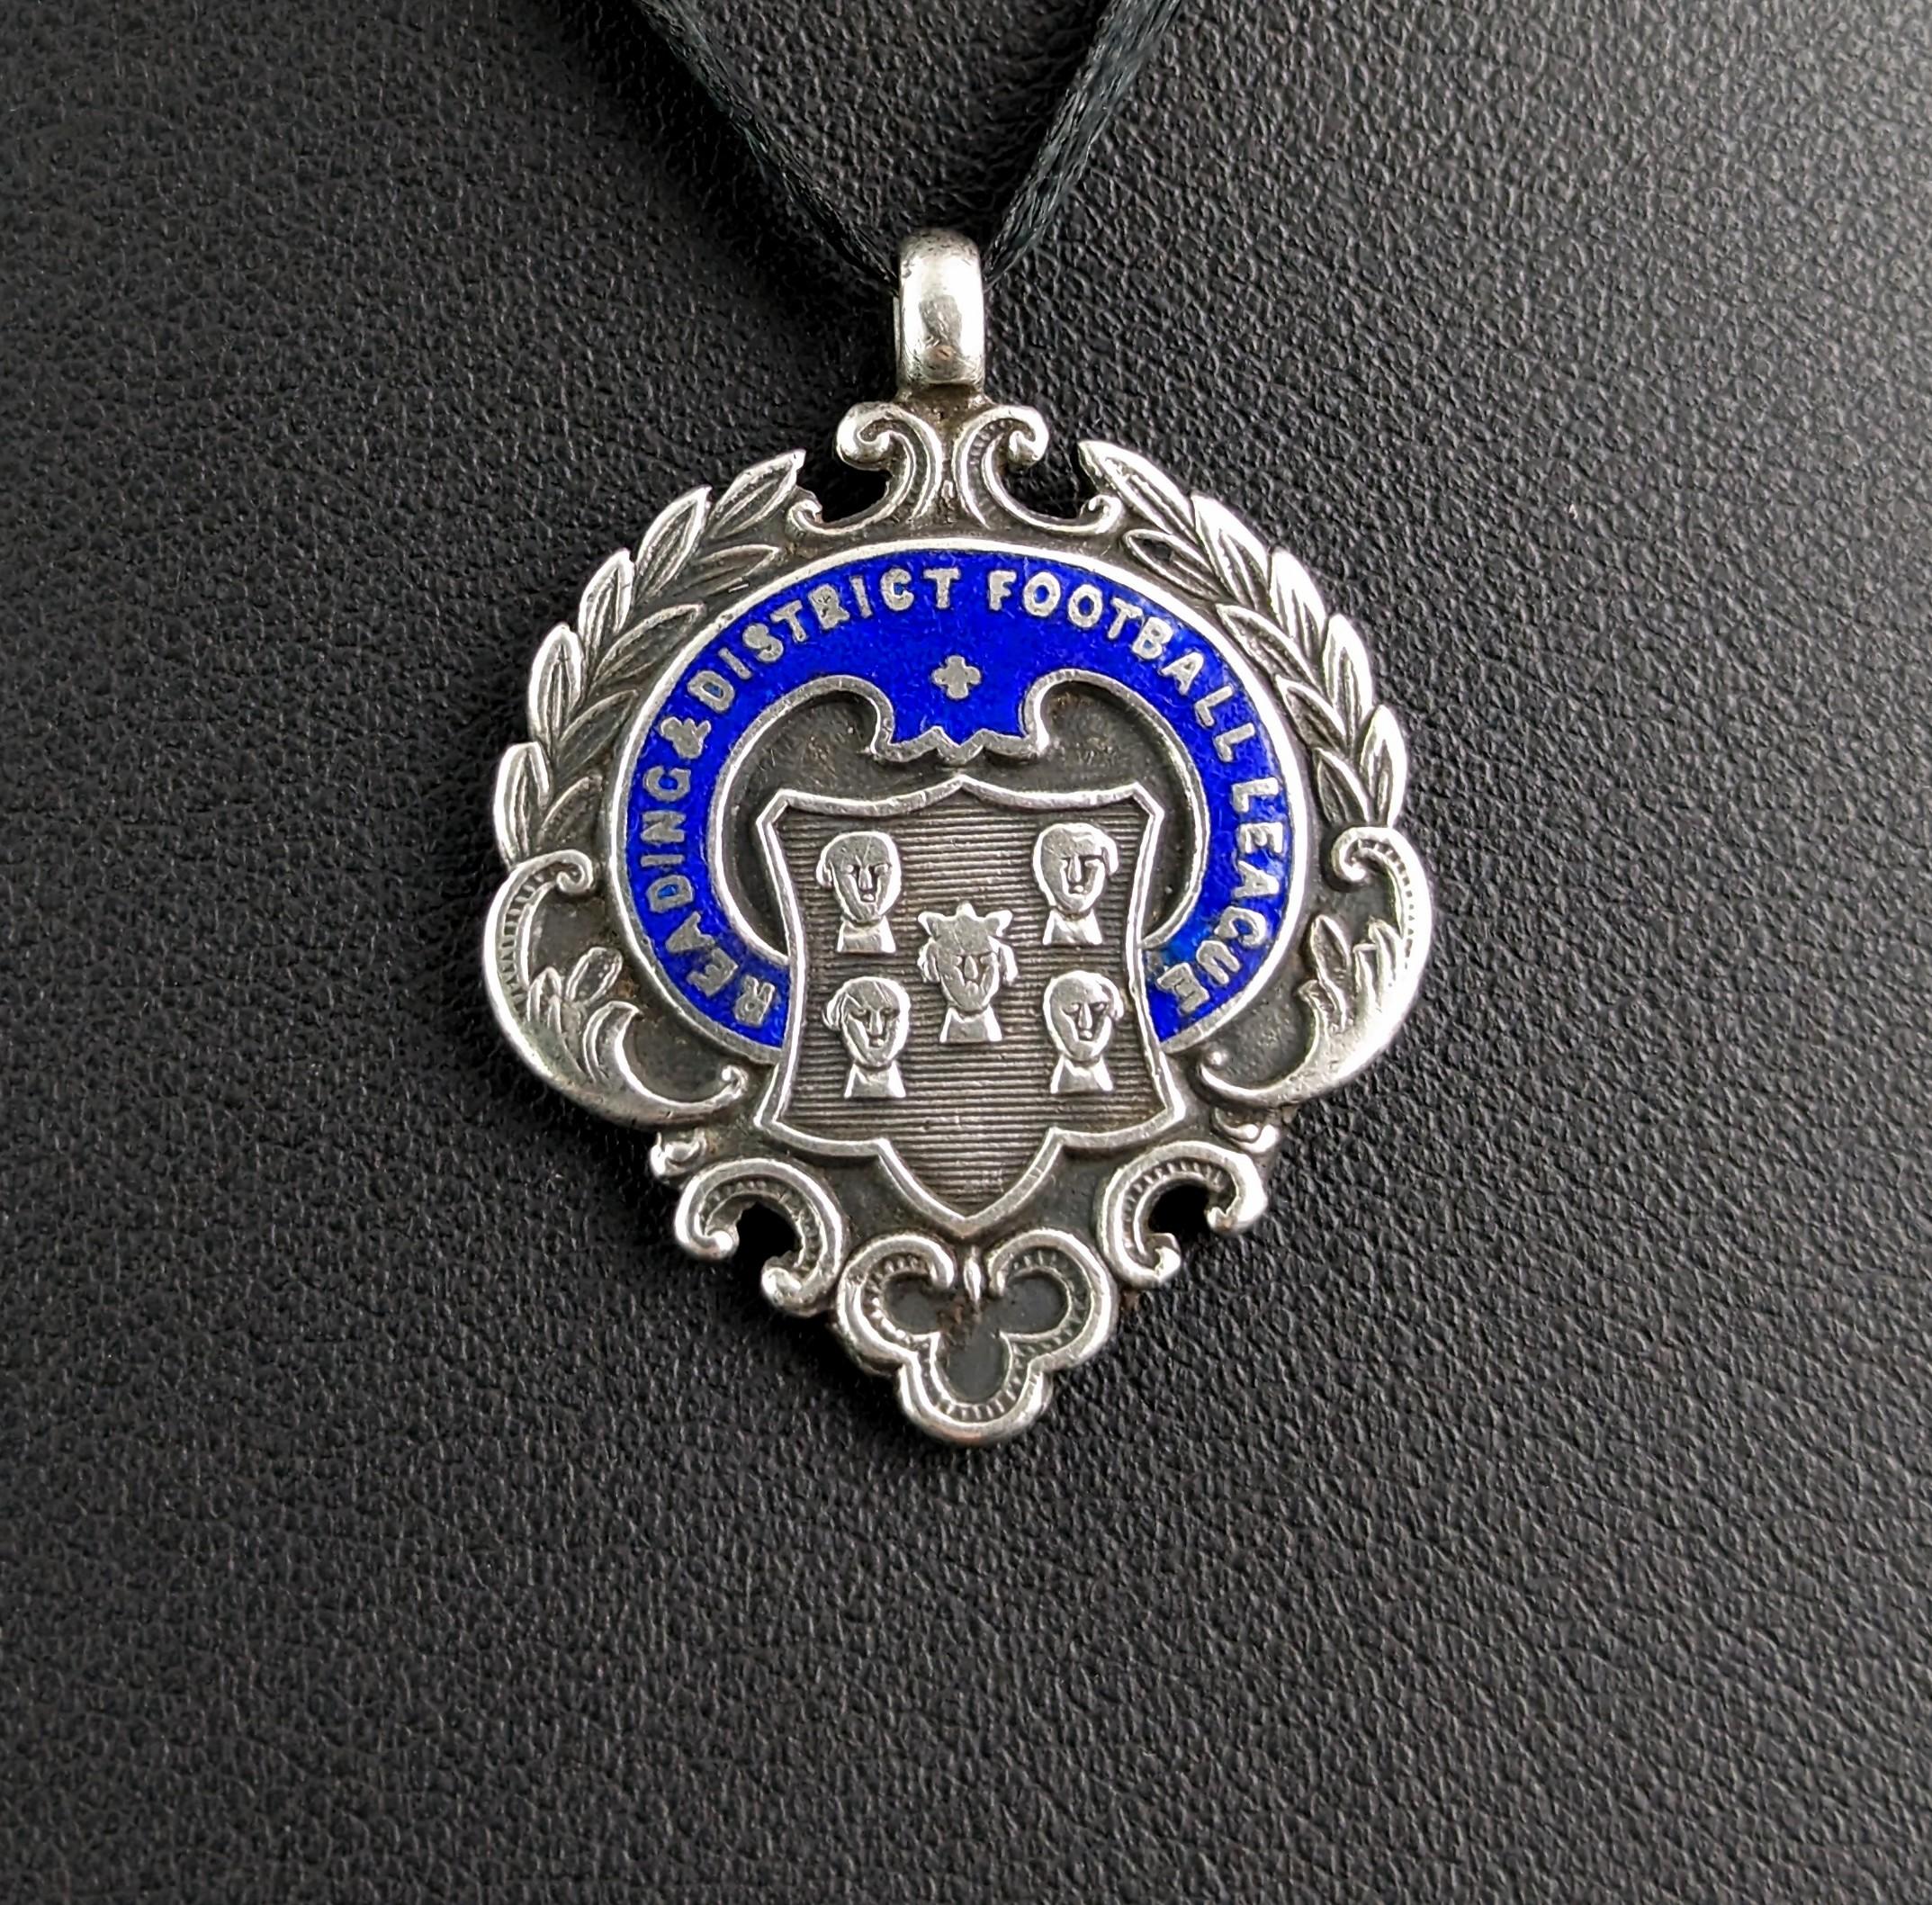 An attractive antique sterling silver and cobalt blue enamelled fob pendant.

It is an unusual shaped fob with a wreath surrounding the outer rim and a club at the bottom, the centre of the fob has a number of faces in light relief contained within